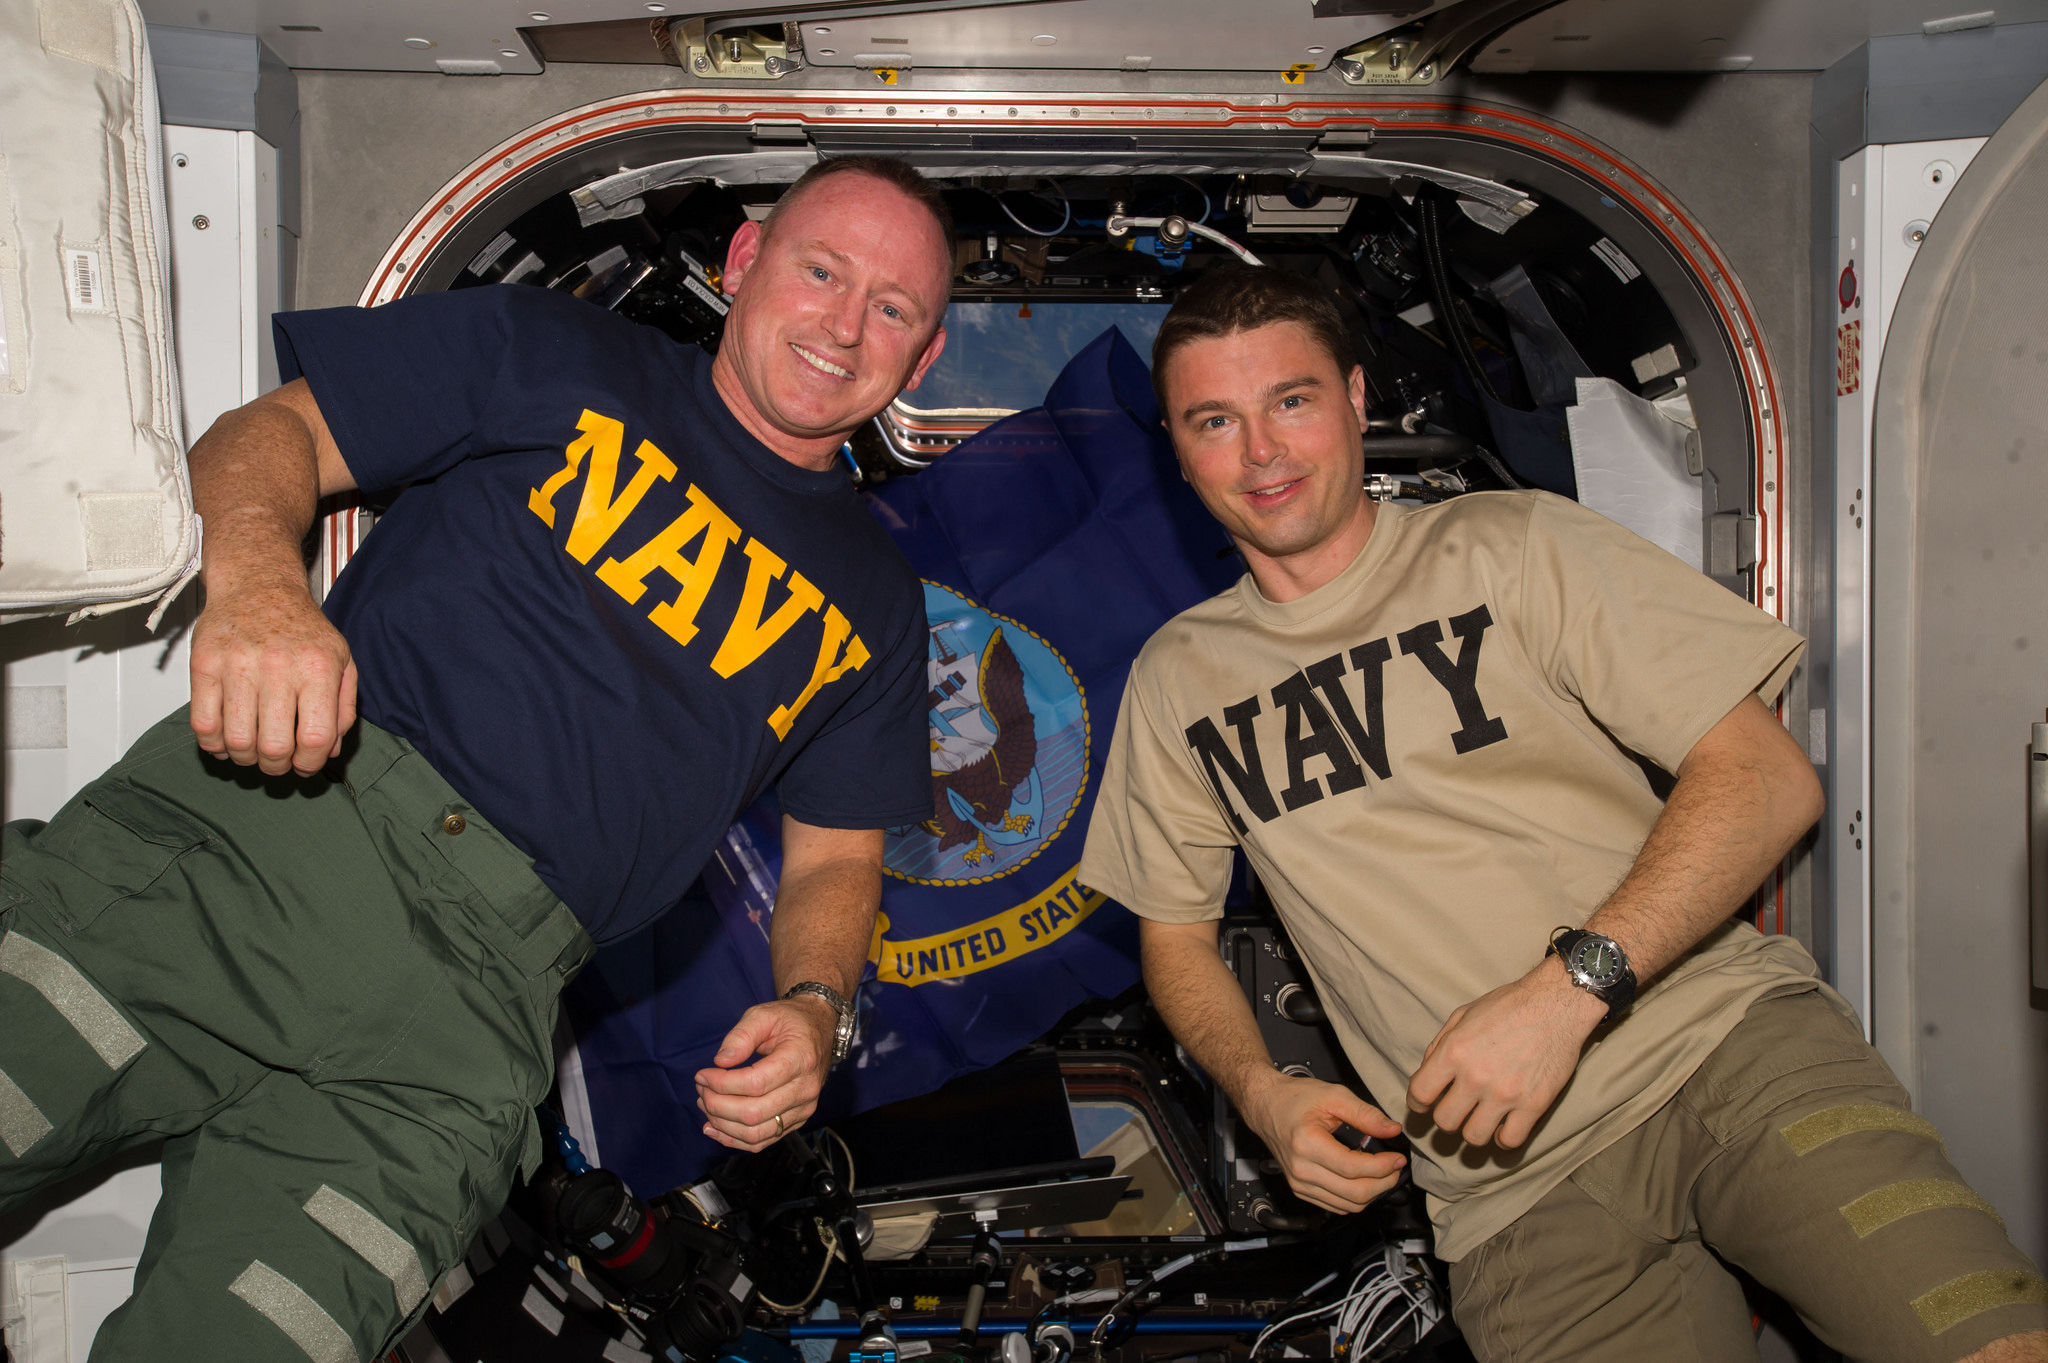 Barry "Butch" Wilmore (left) and Reid Wiseman will perform EVA-28 tomorrow, the first U.S. spacewalk since November 2008 to feature an all-Navy crew. Photo Credit: NASA